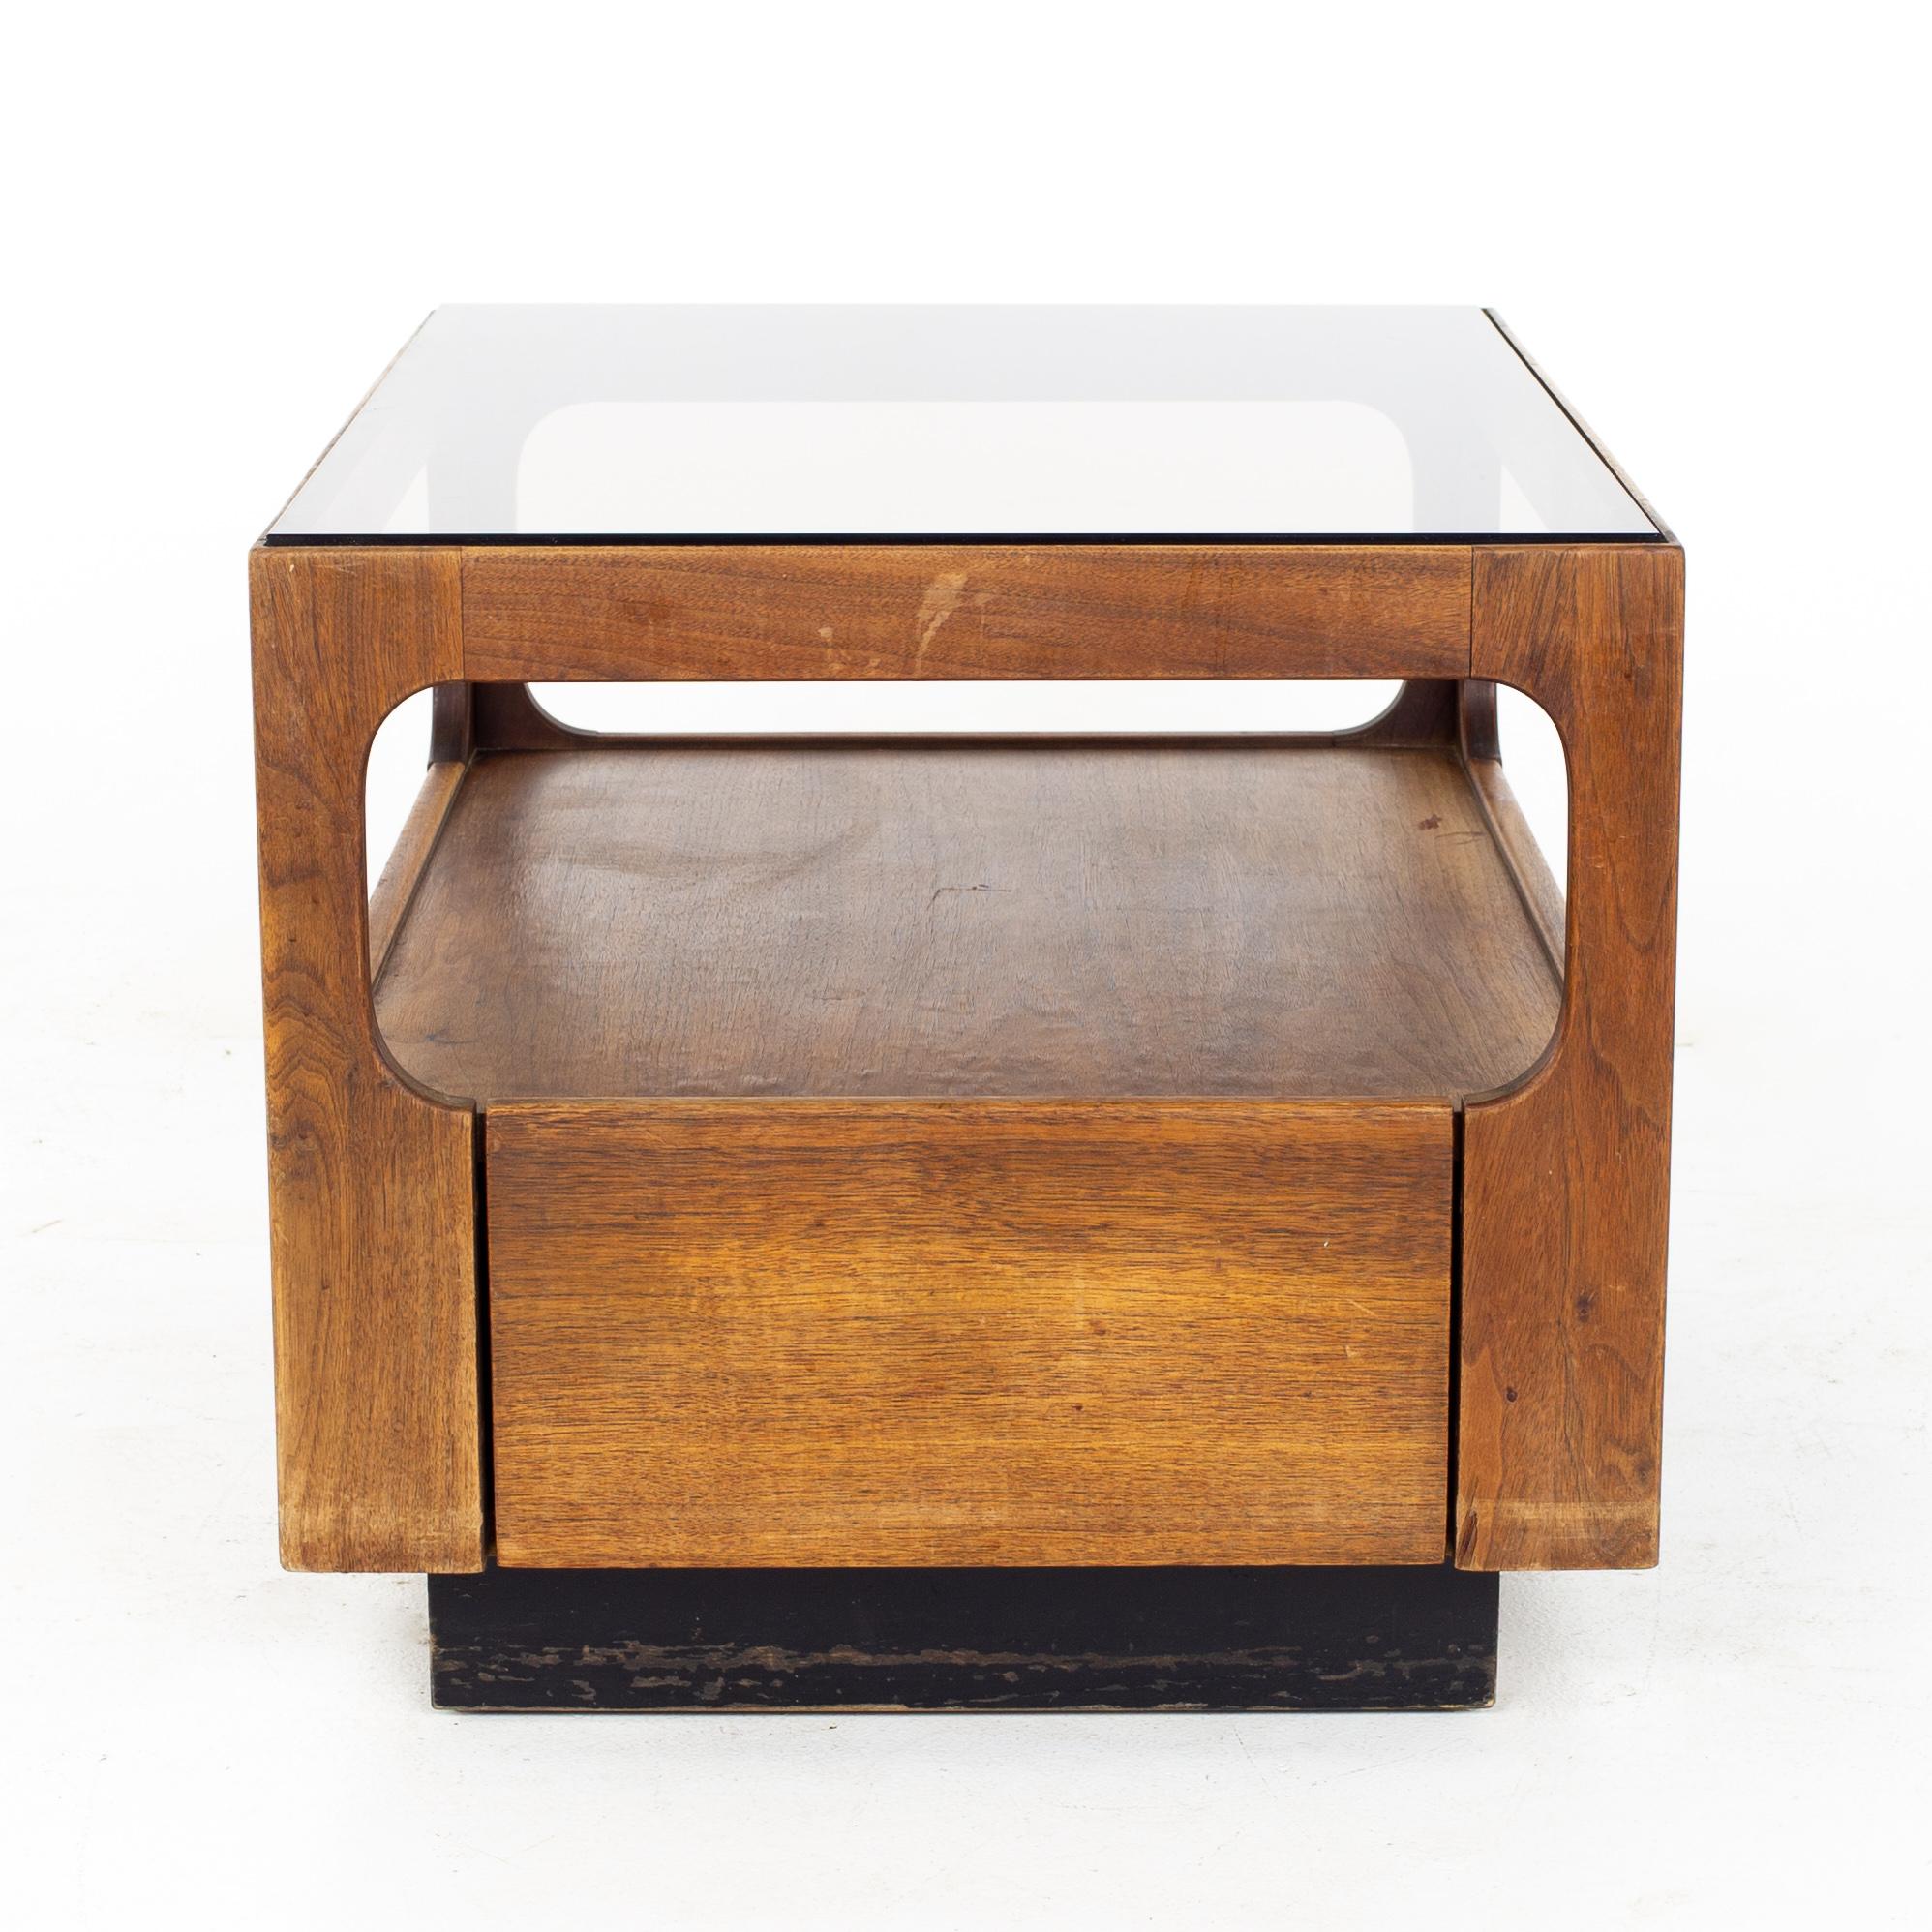 Brown Saltman Mid Century glass top side end table with drawer
Table measures: 27 wide x 20 deep x 18 inches high

All pieces of furniture can be had in what we call restored vintage condition. That means the piece is restored upon purchase so